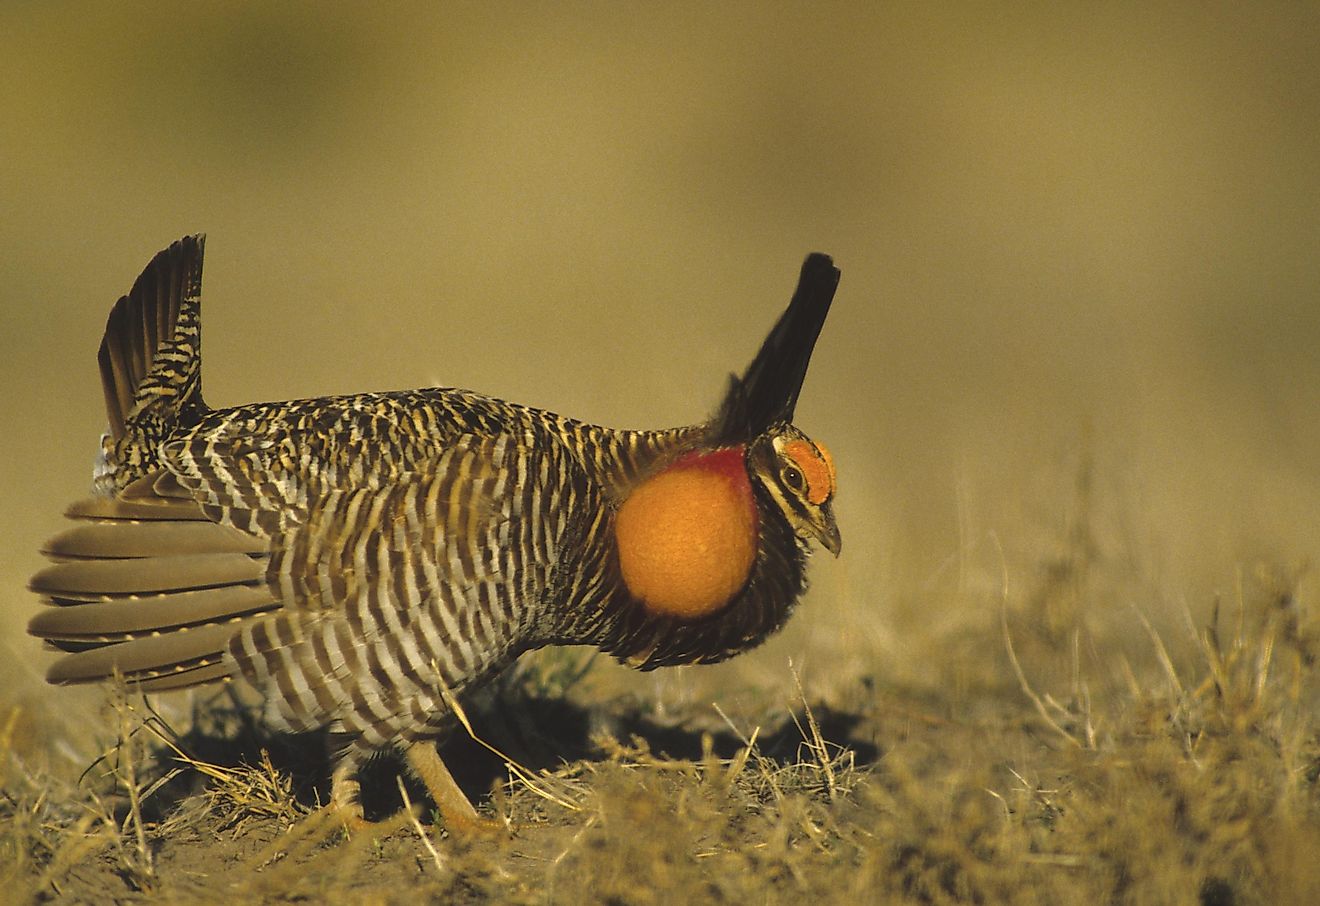 A Male Prairie Chicken "strutting" its stuff. Males are known for the flamboyant stances they take to attract mates.